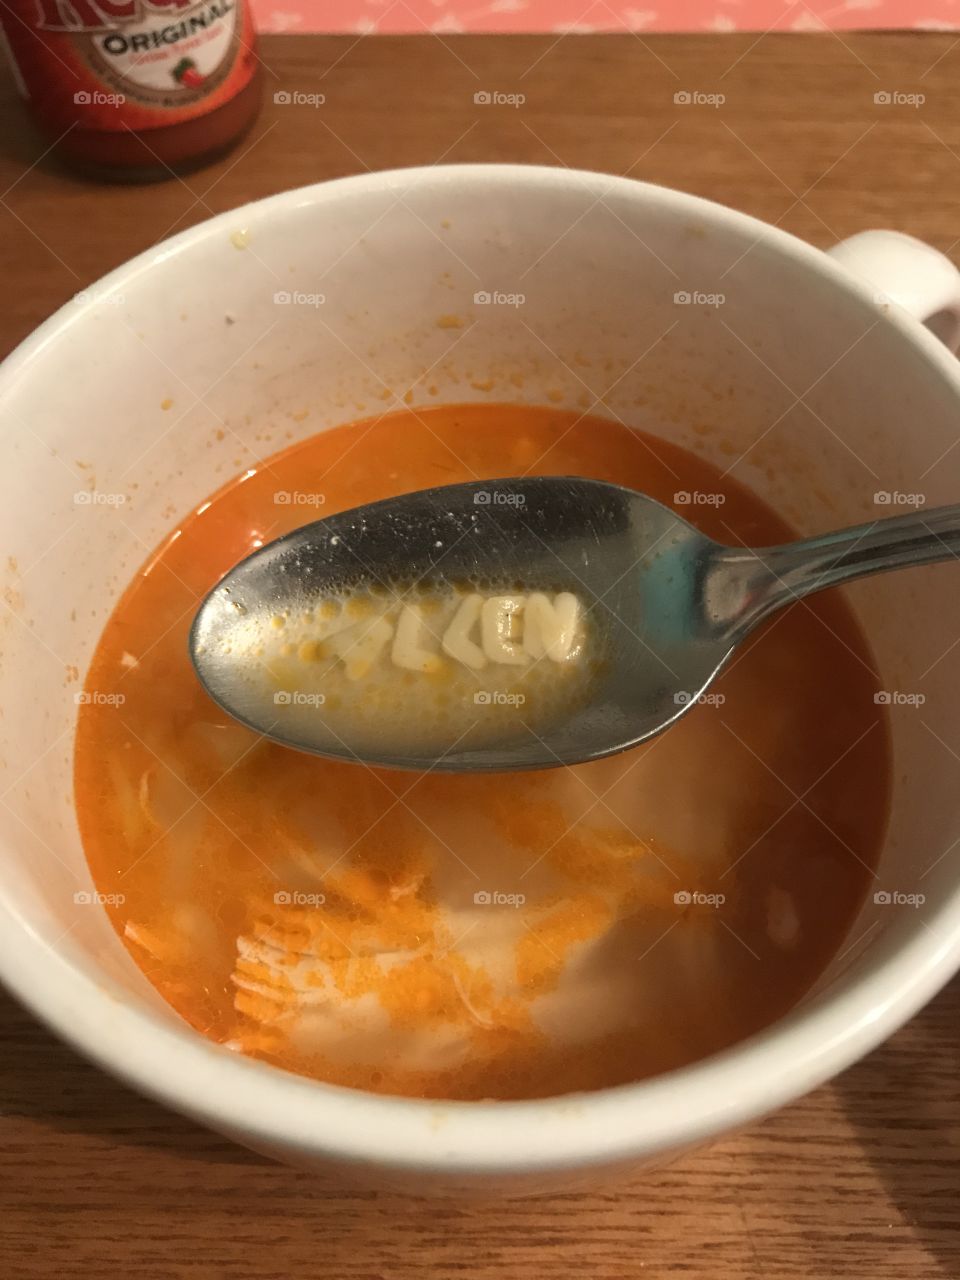 My soup spelled my name. 